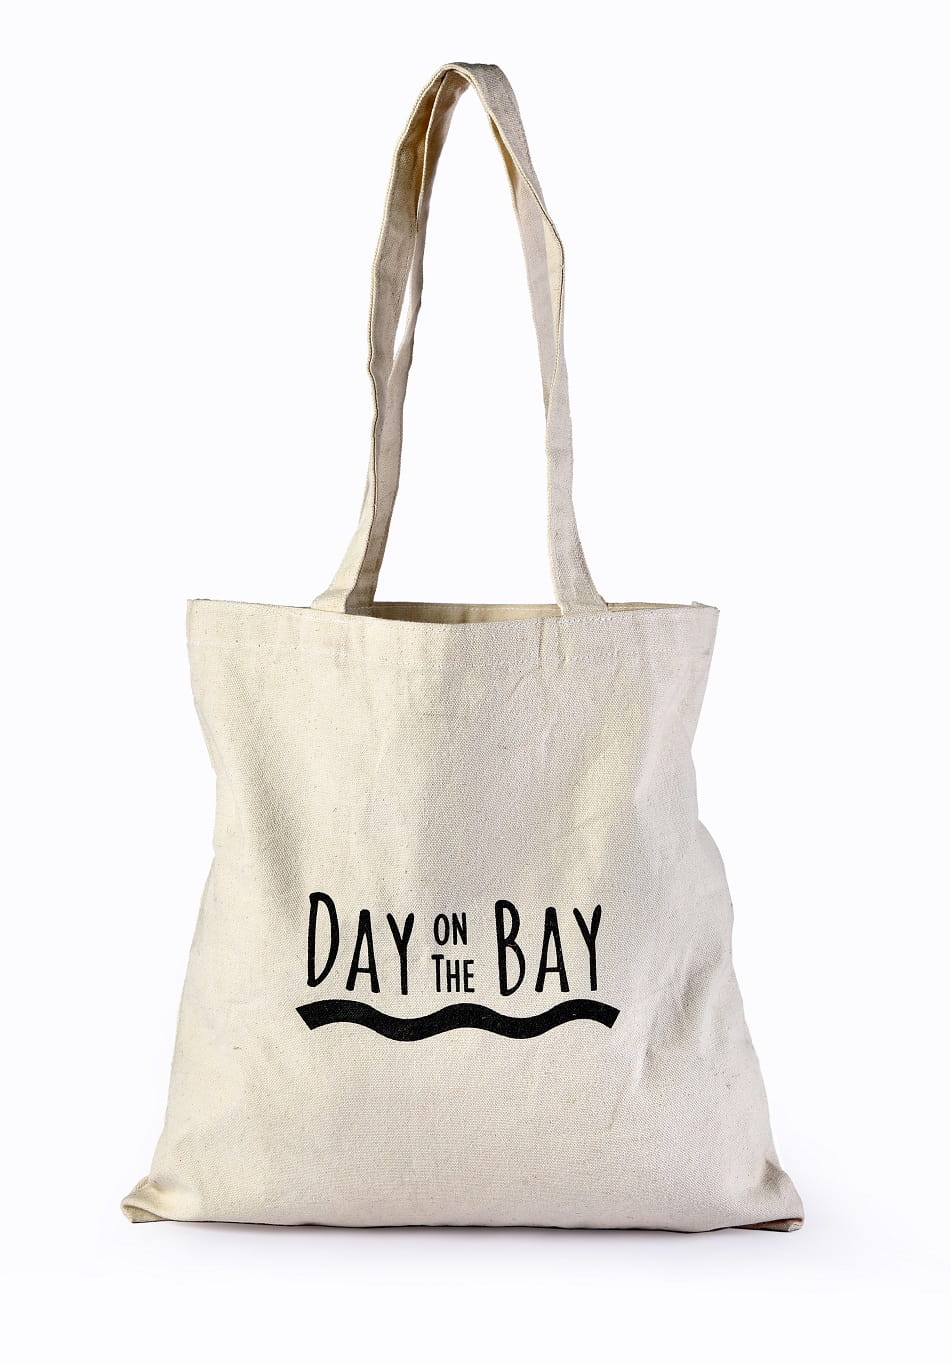 Reusable Cotton Promotional Shopping Bag with Long Handles